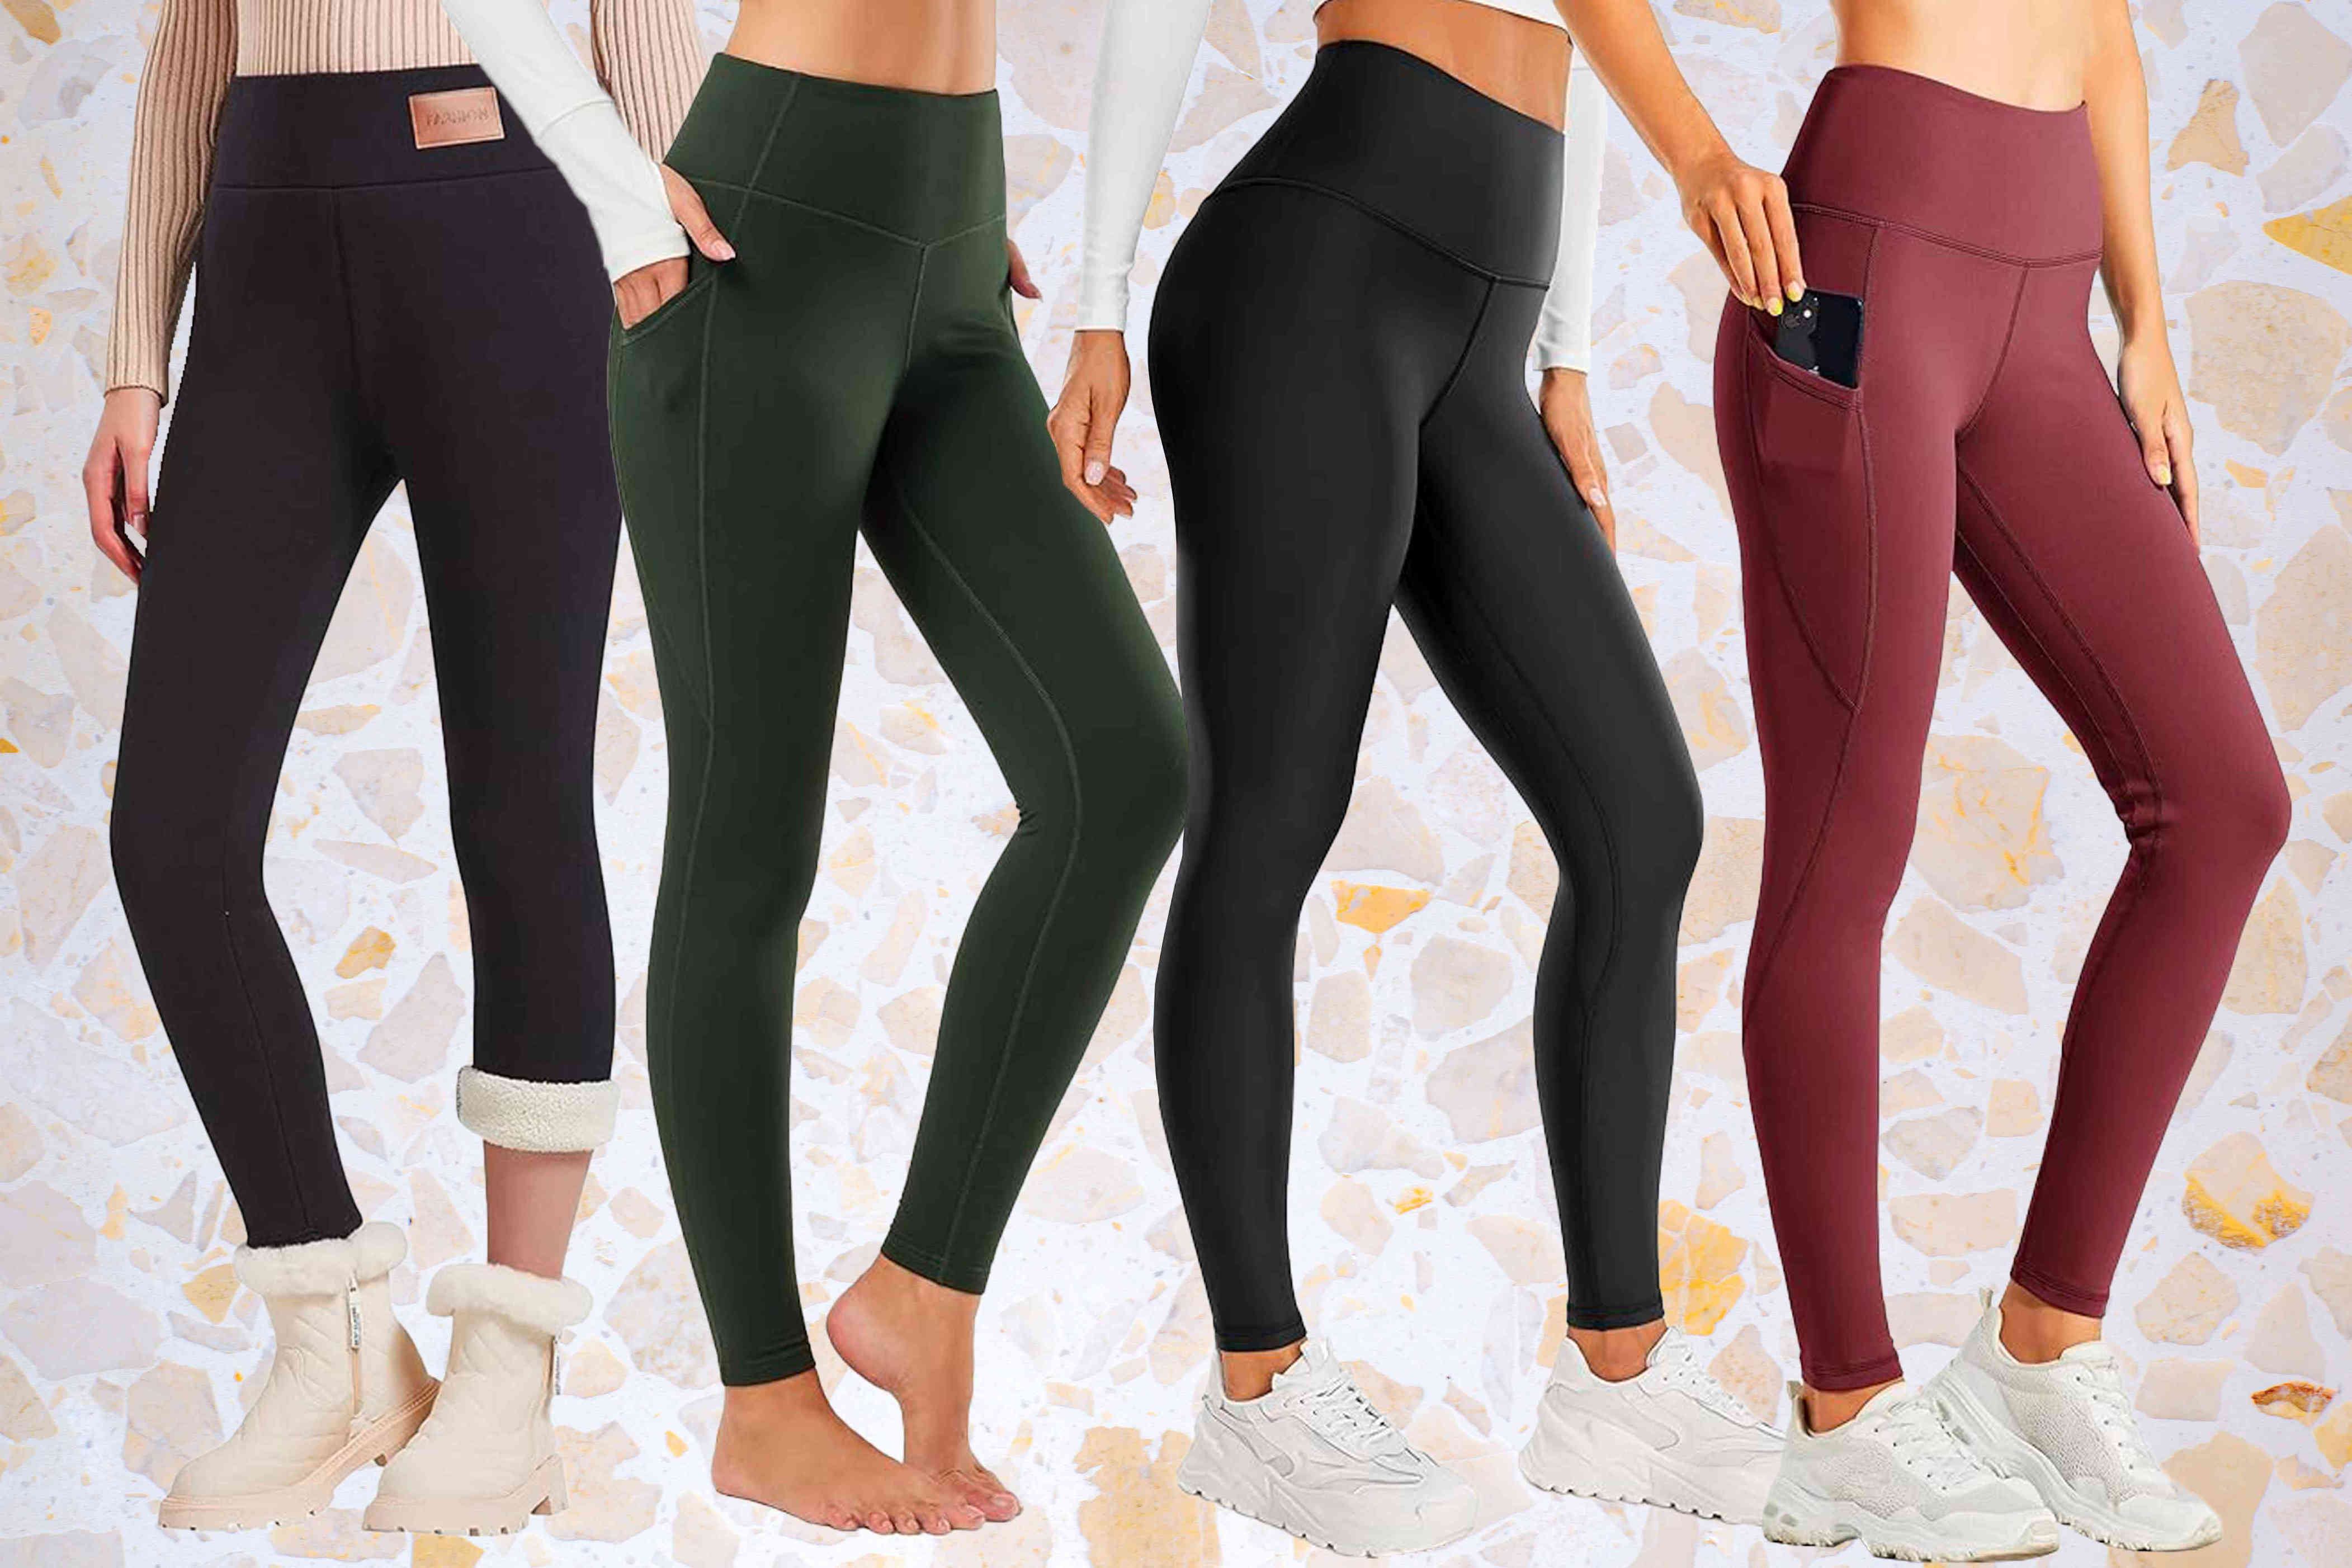 The 15 Best Fleece-lined Leggings From Amazon to Keep You Warm This ...